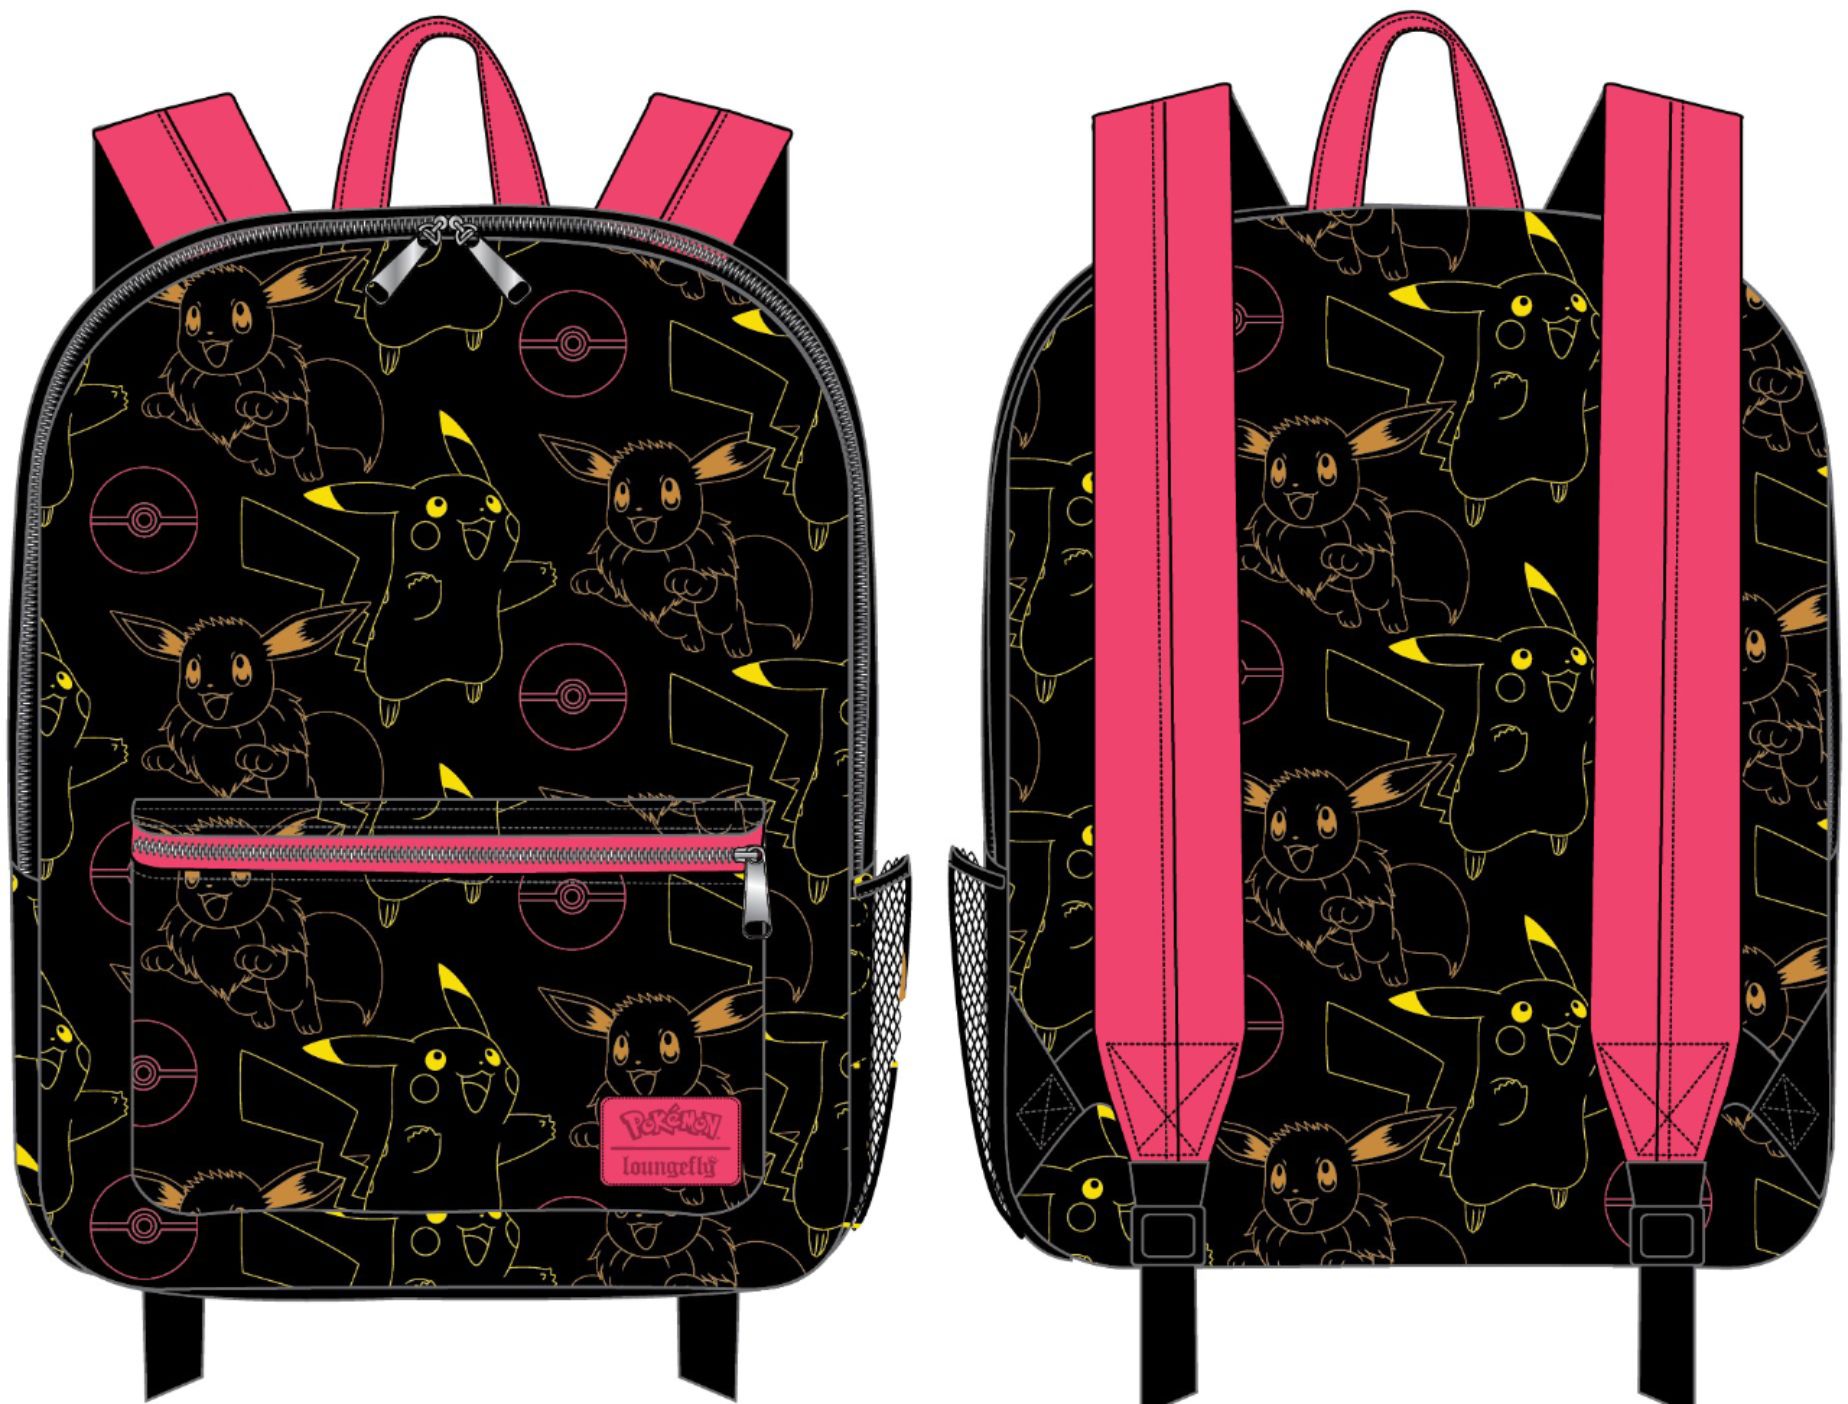 TATE'S Comics + Toys + More  Staff Pick of the Week: Loungefly x Pokémon  Ghost Type Backpack